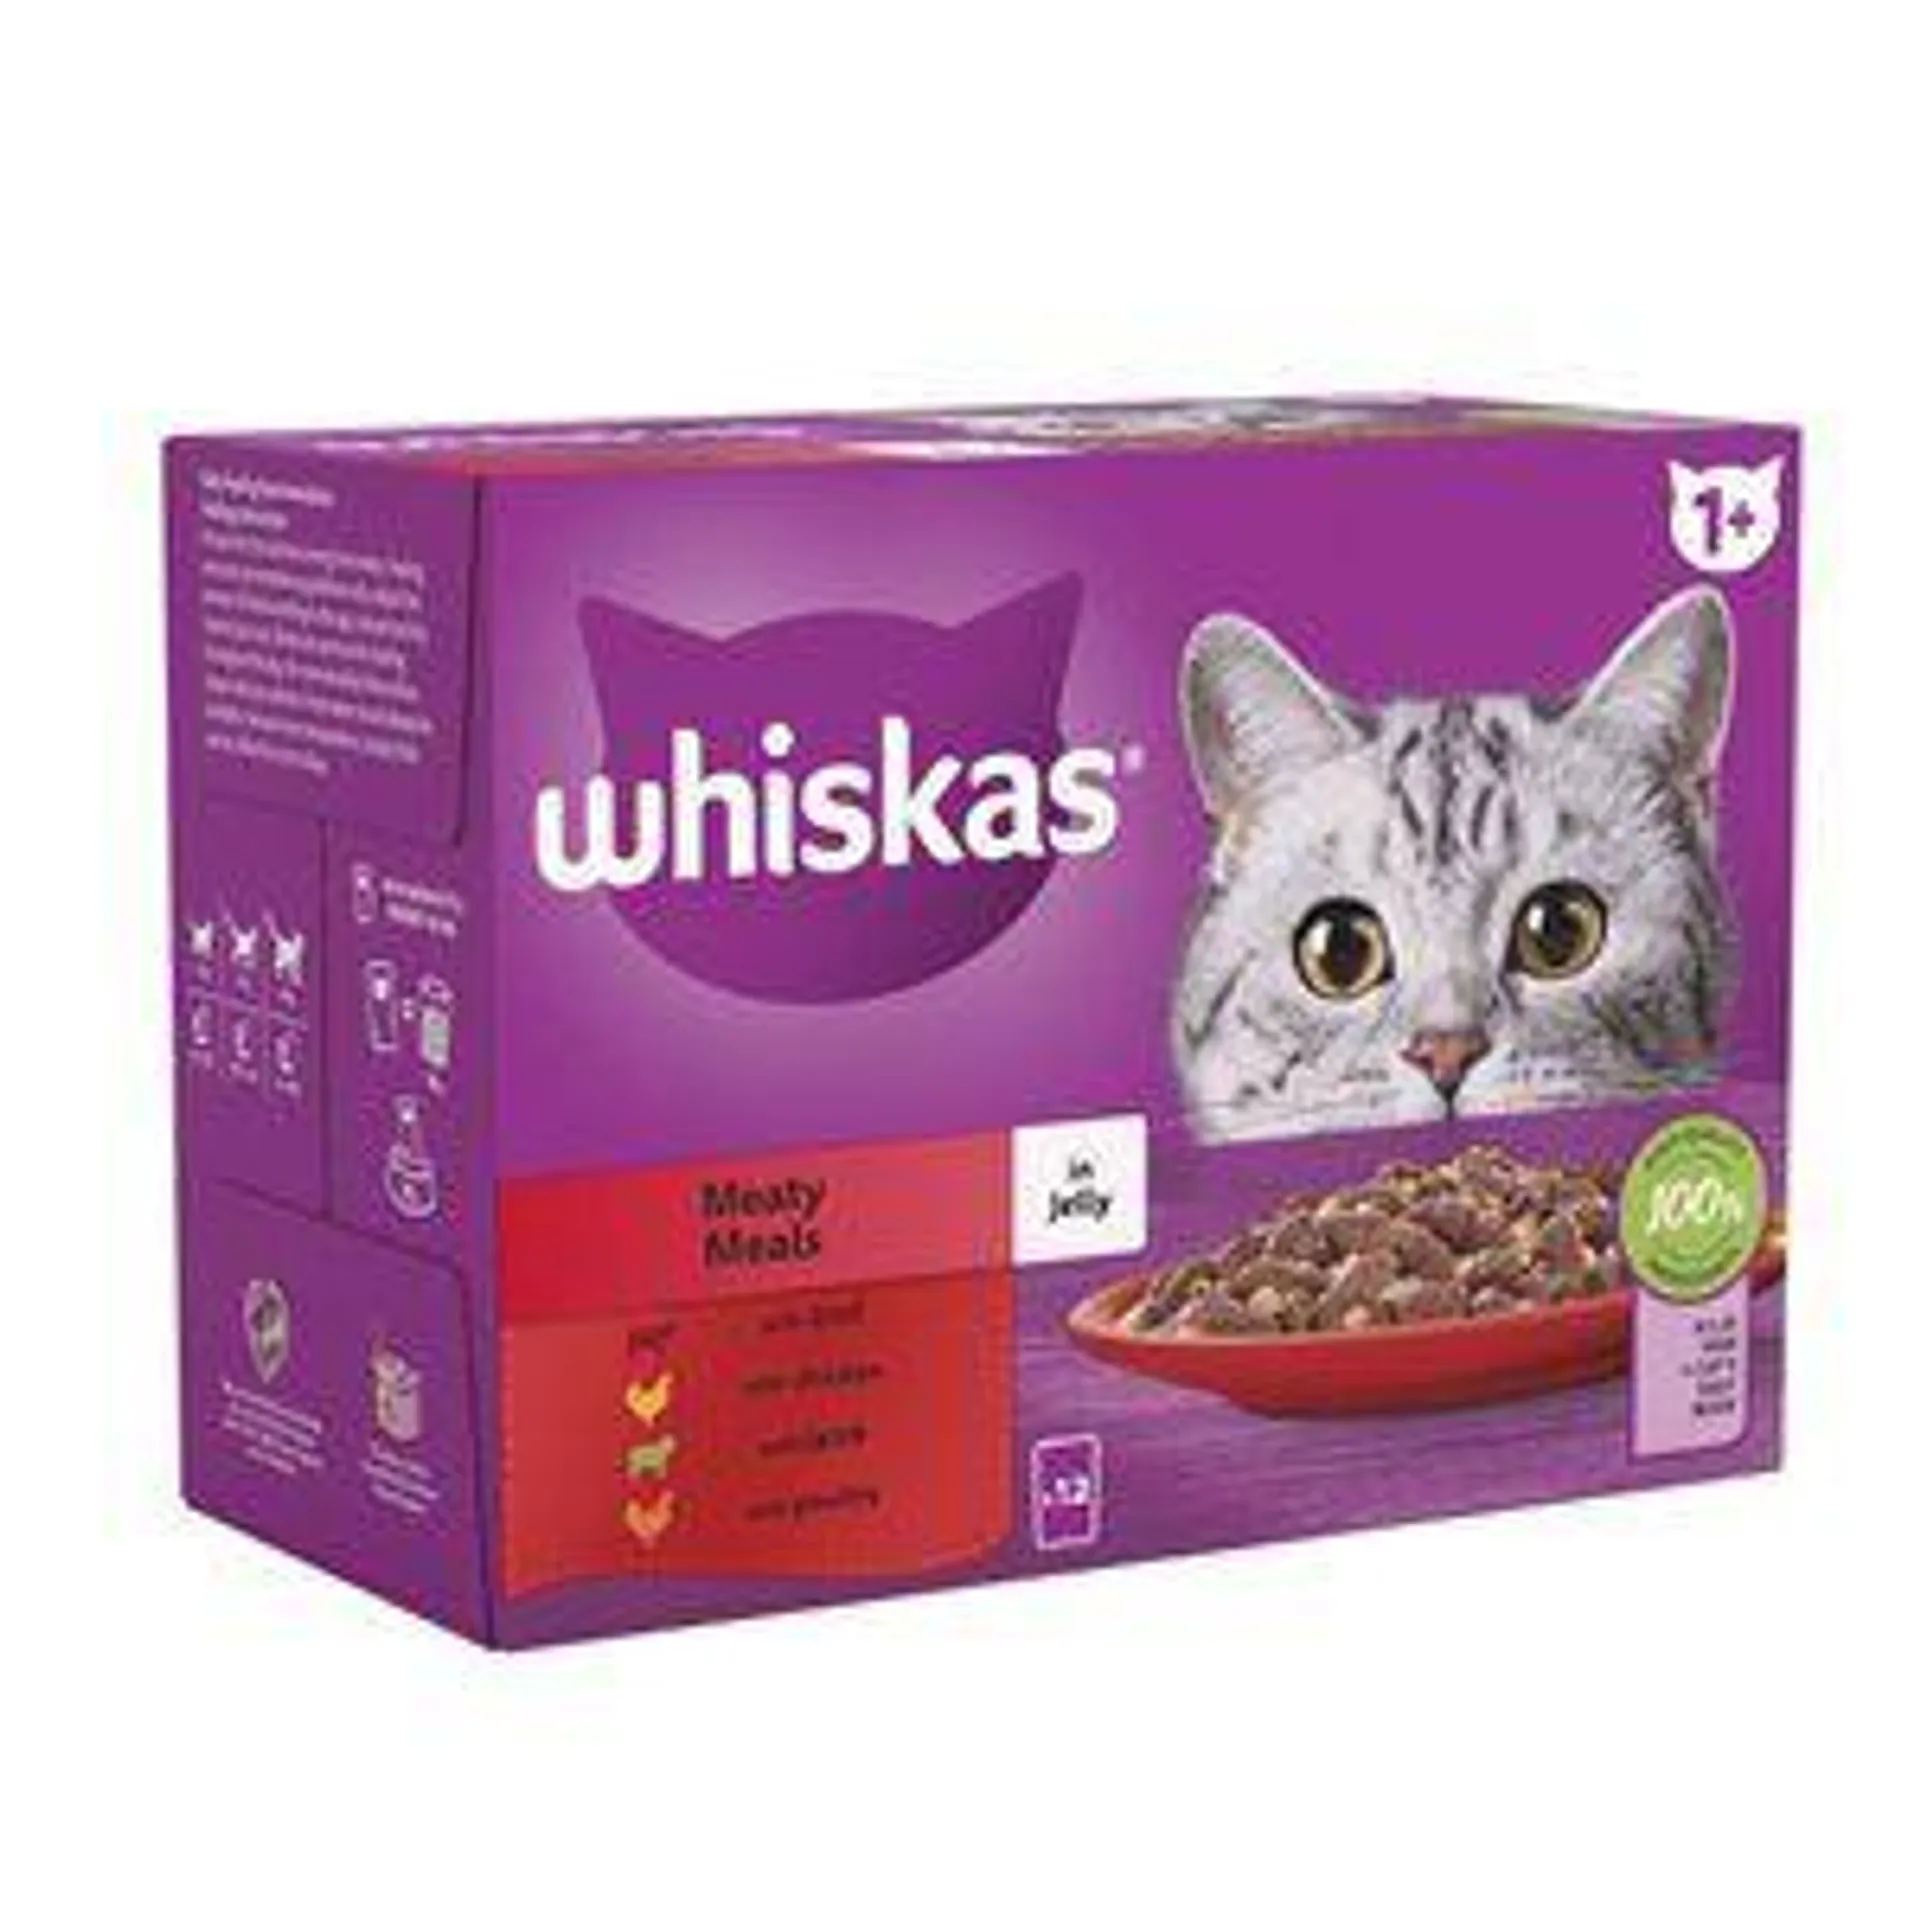 Whiskas 1+ Meaty Meals In Jelly Multipack